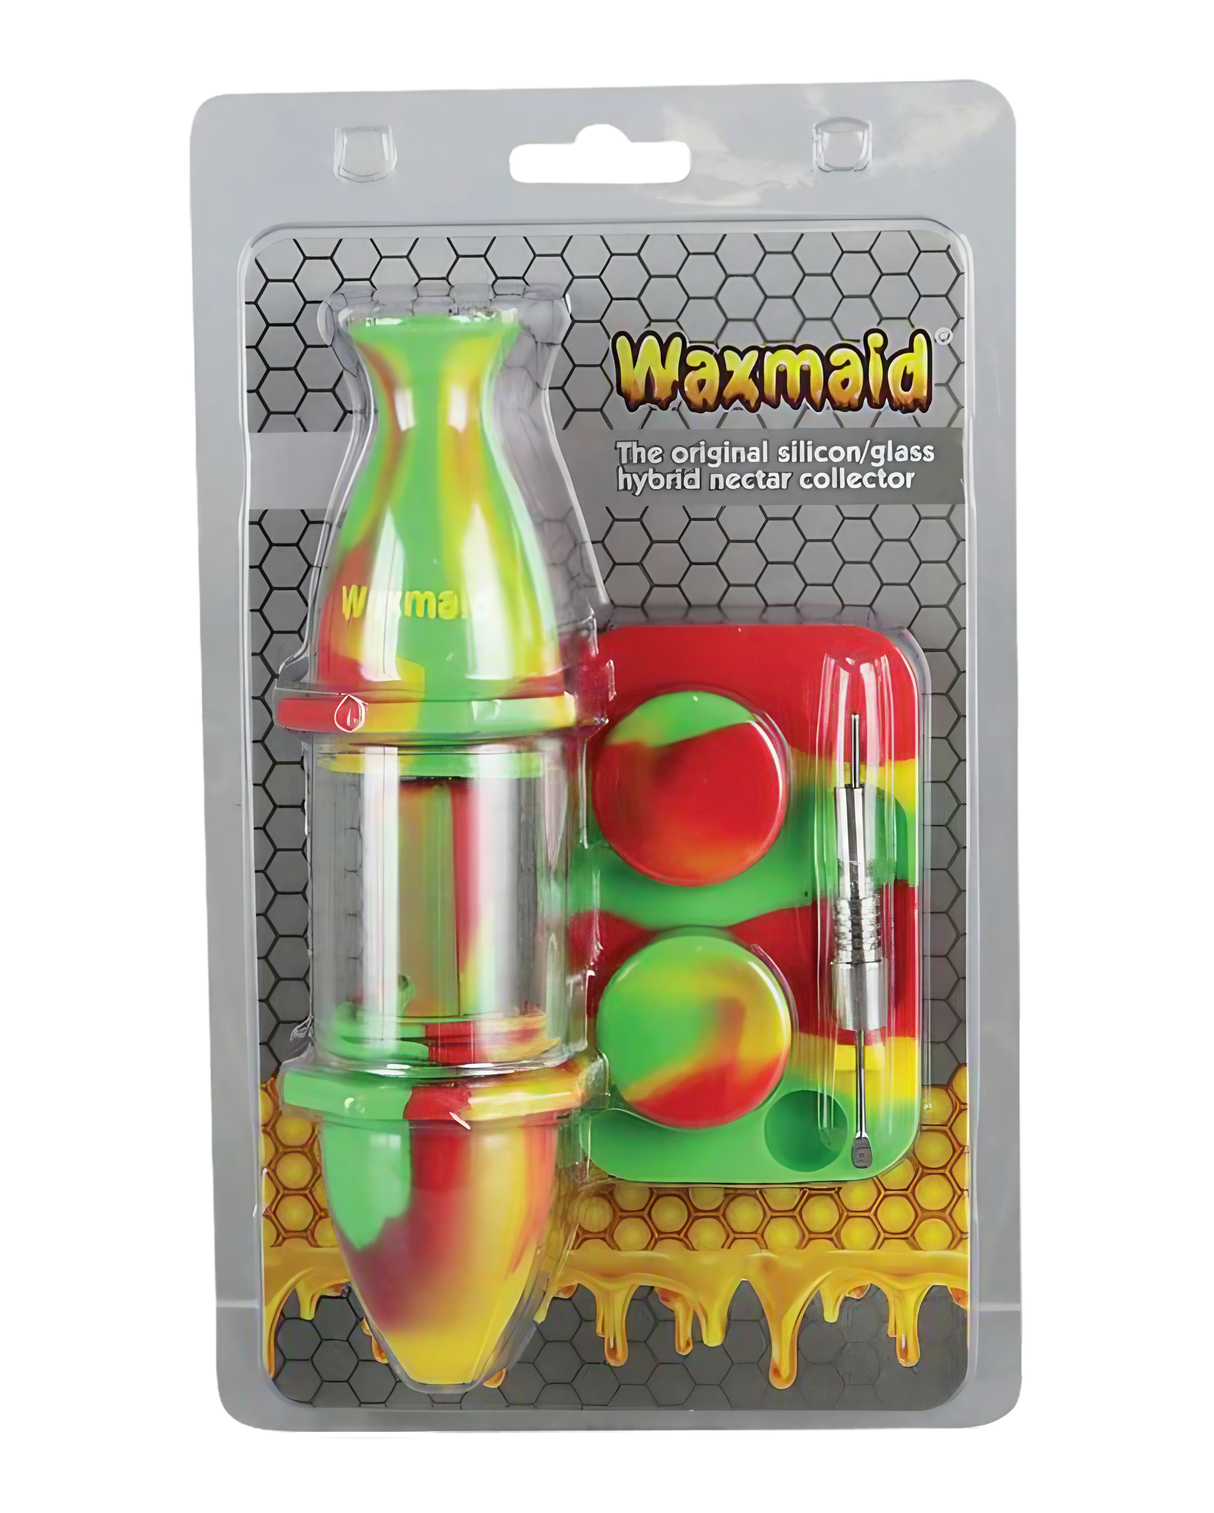 Waxmaid Handheld Silicone Nectar Collector Kit with Storage